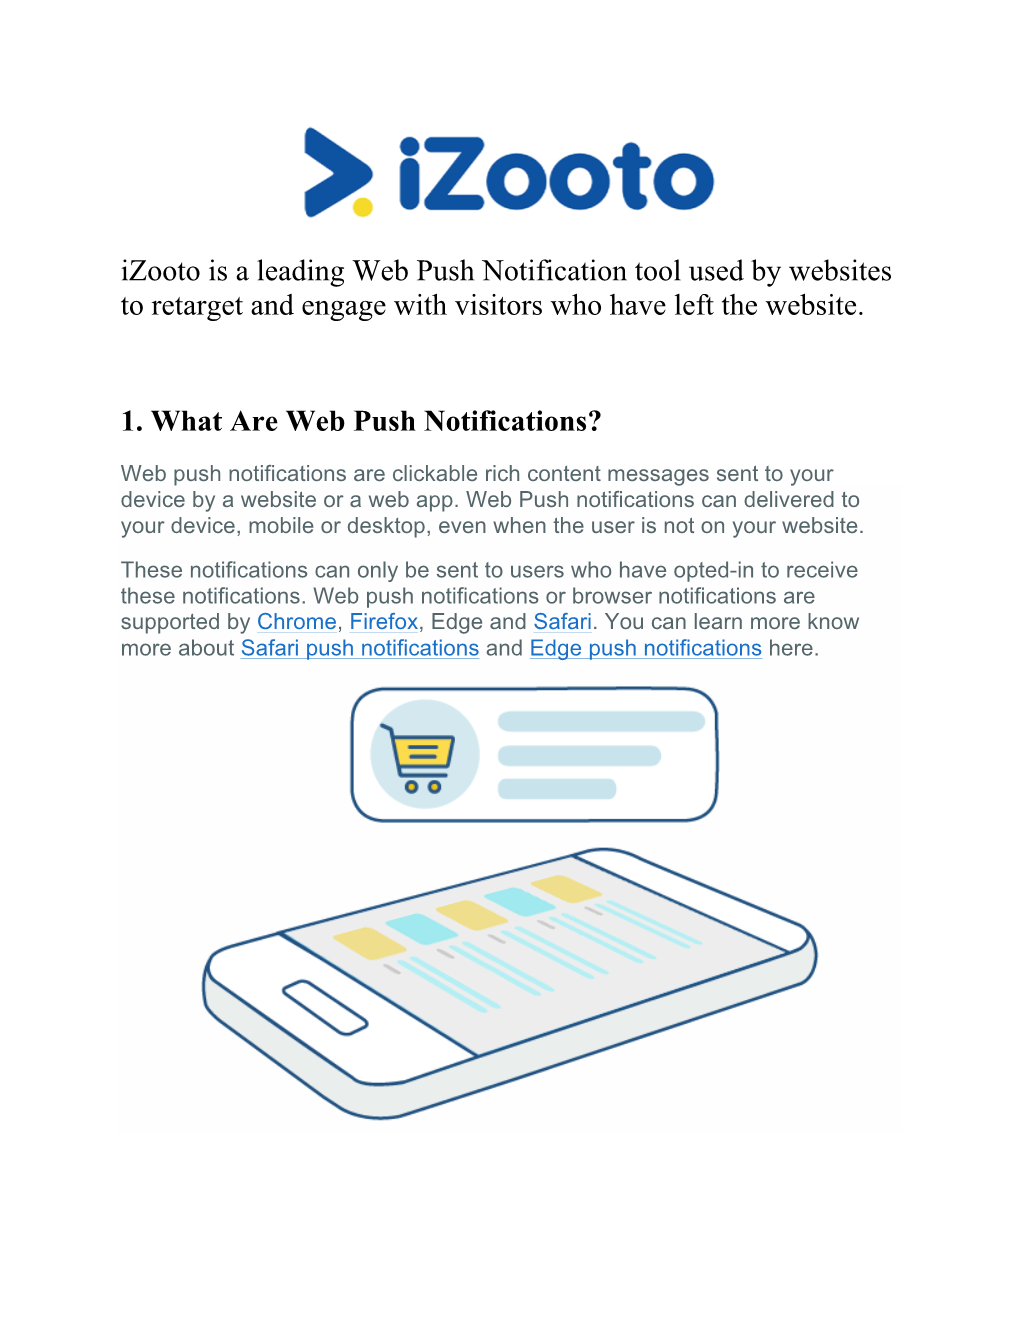 Izooto Is a Leading Web Push Notification Tool Used by Websites to Retarget and Engage with Visitors Who Have Left the Website